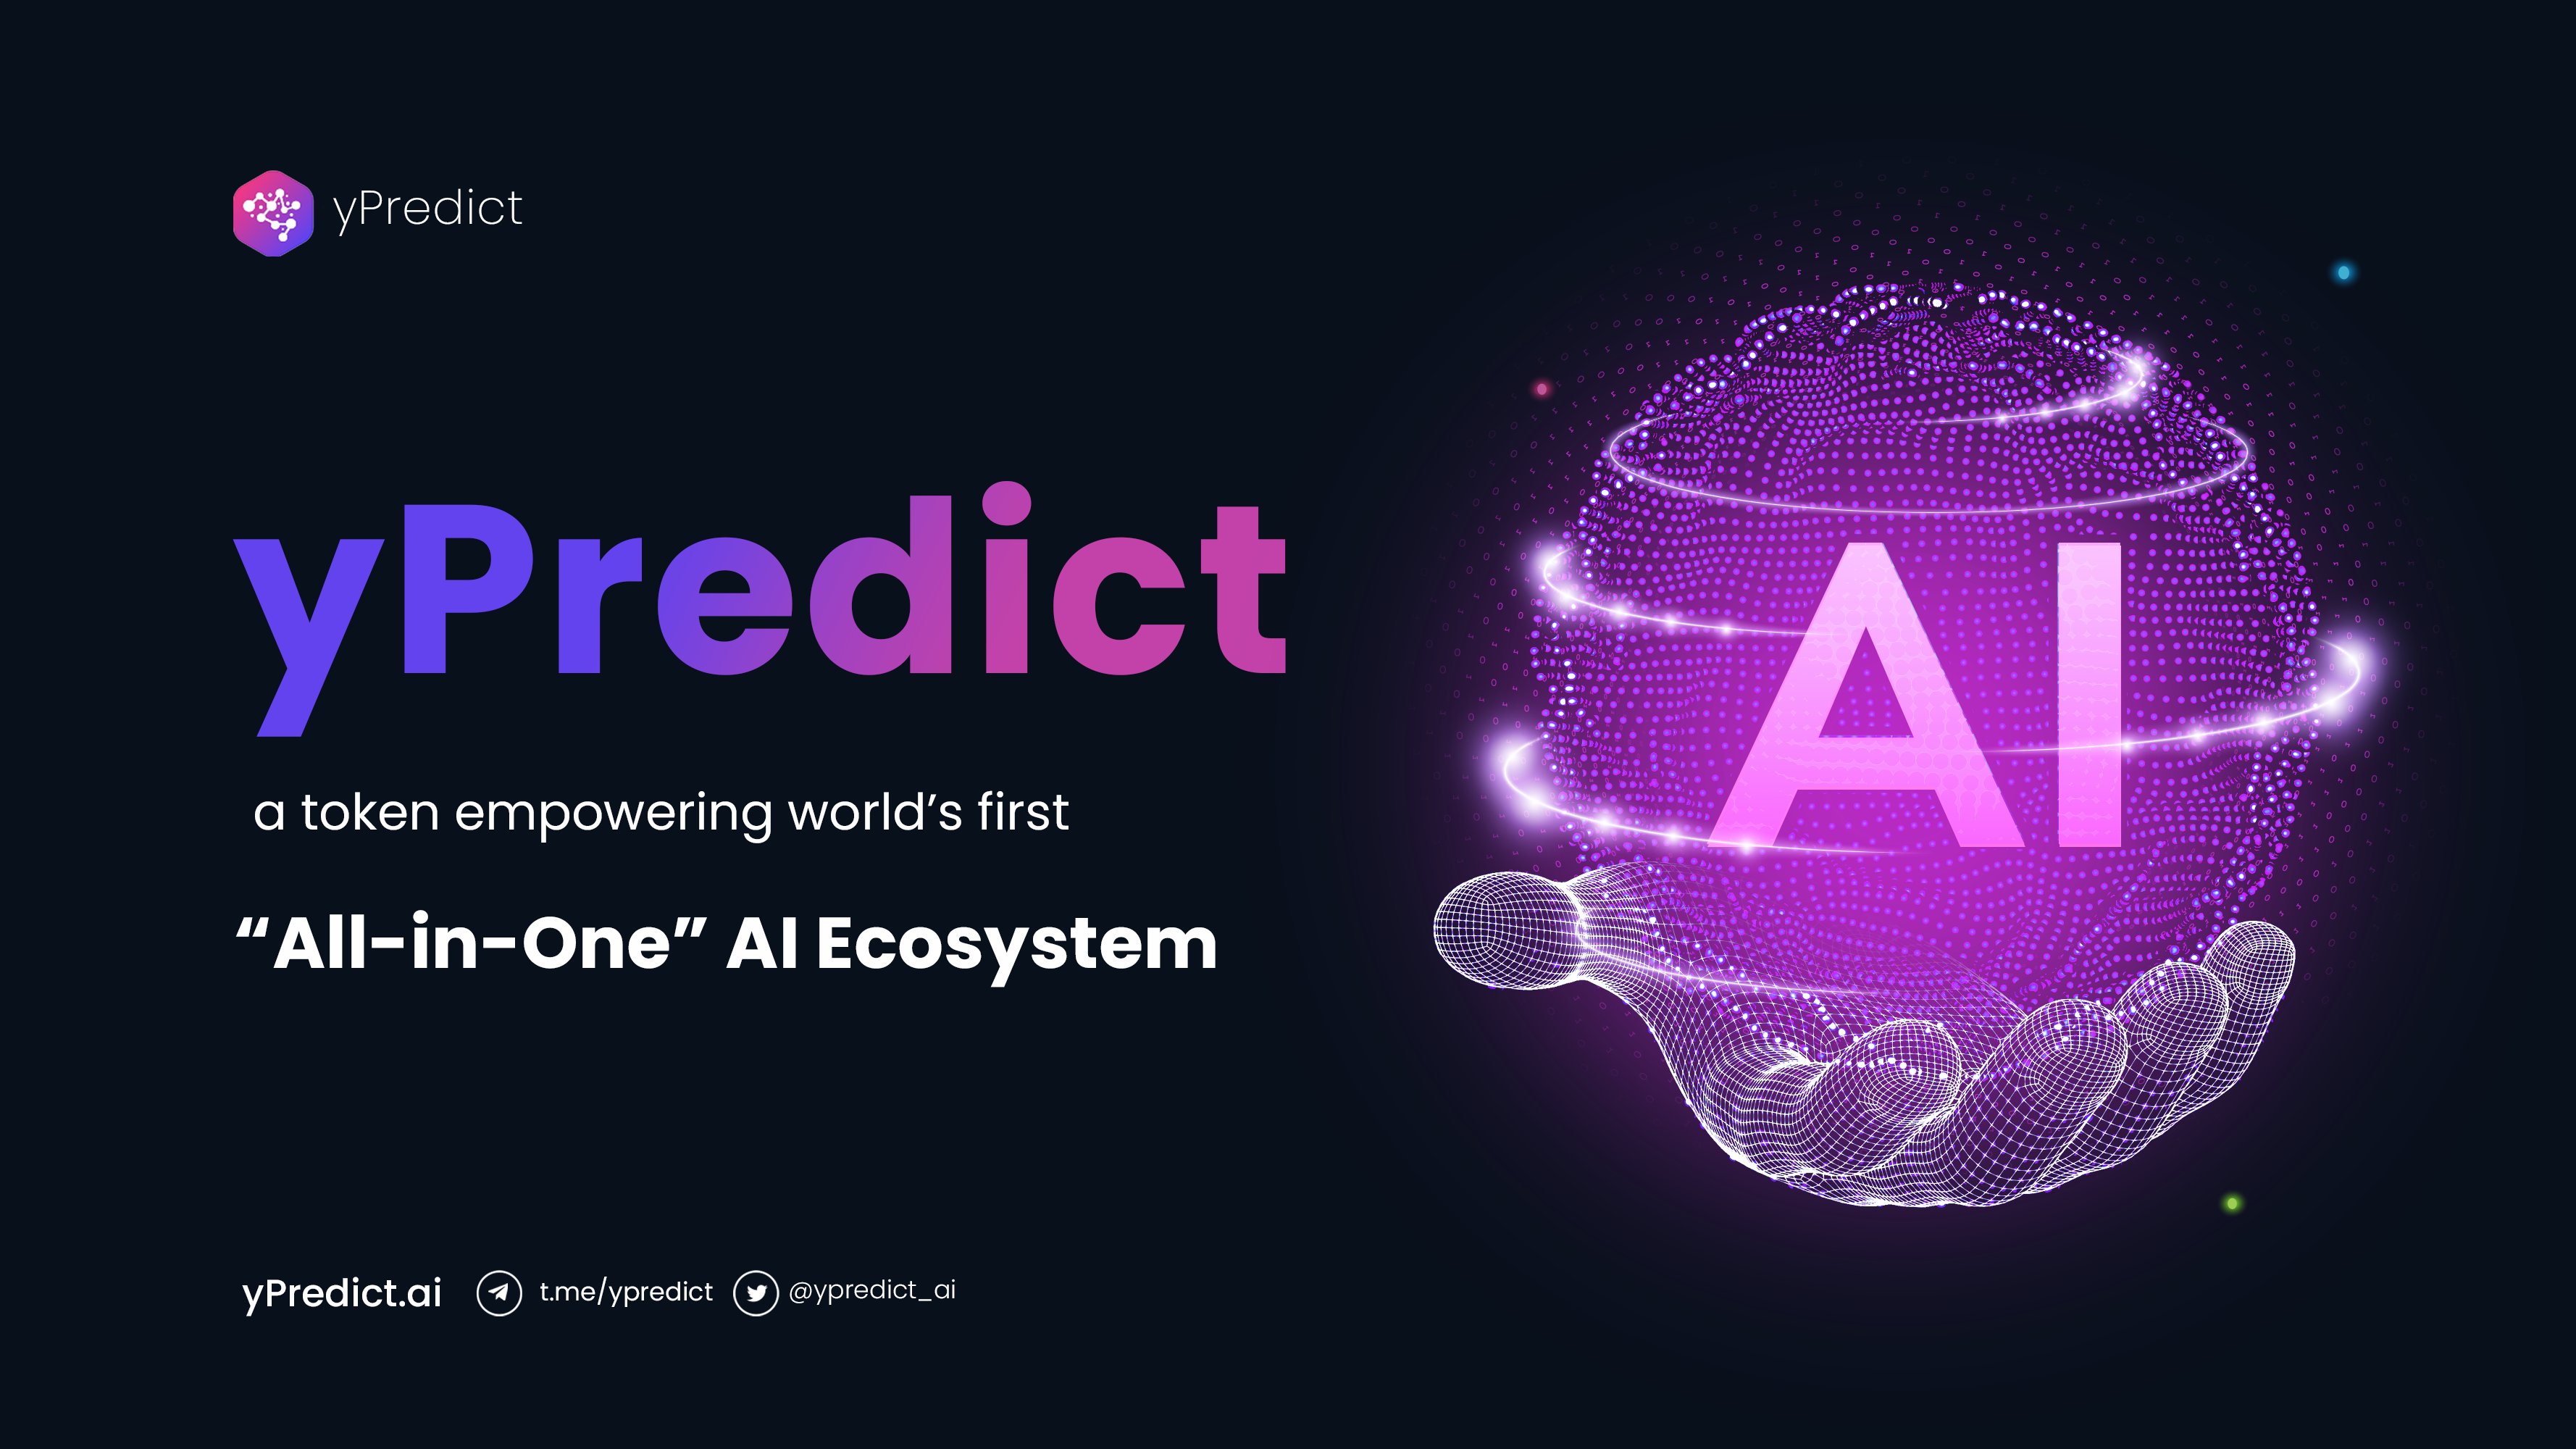 yPredict&amp;#039;s crypto presale is advancing, offering AI-based trading tools and targeting a final raise of over $6.5 million.